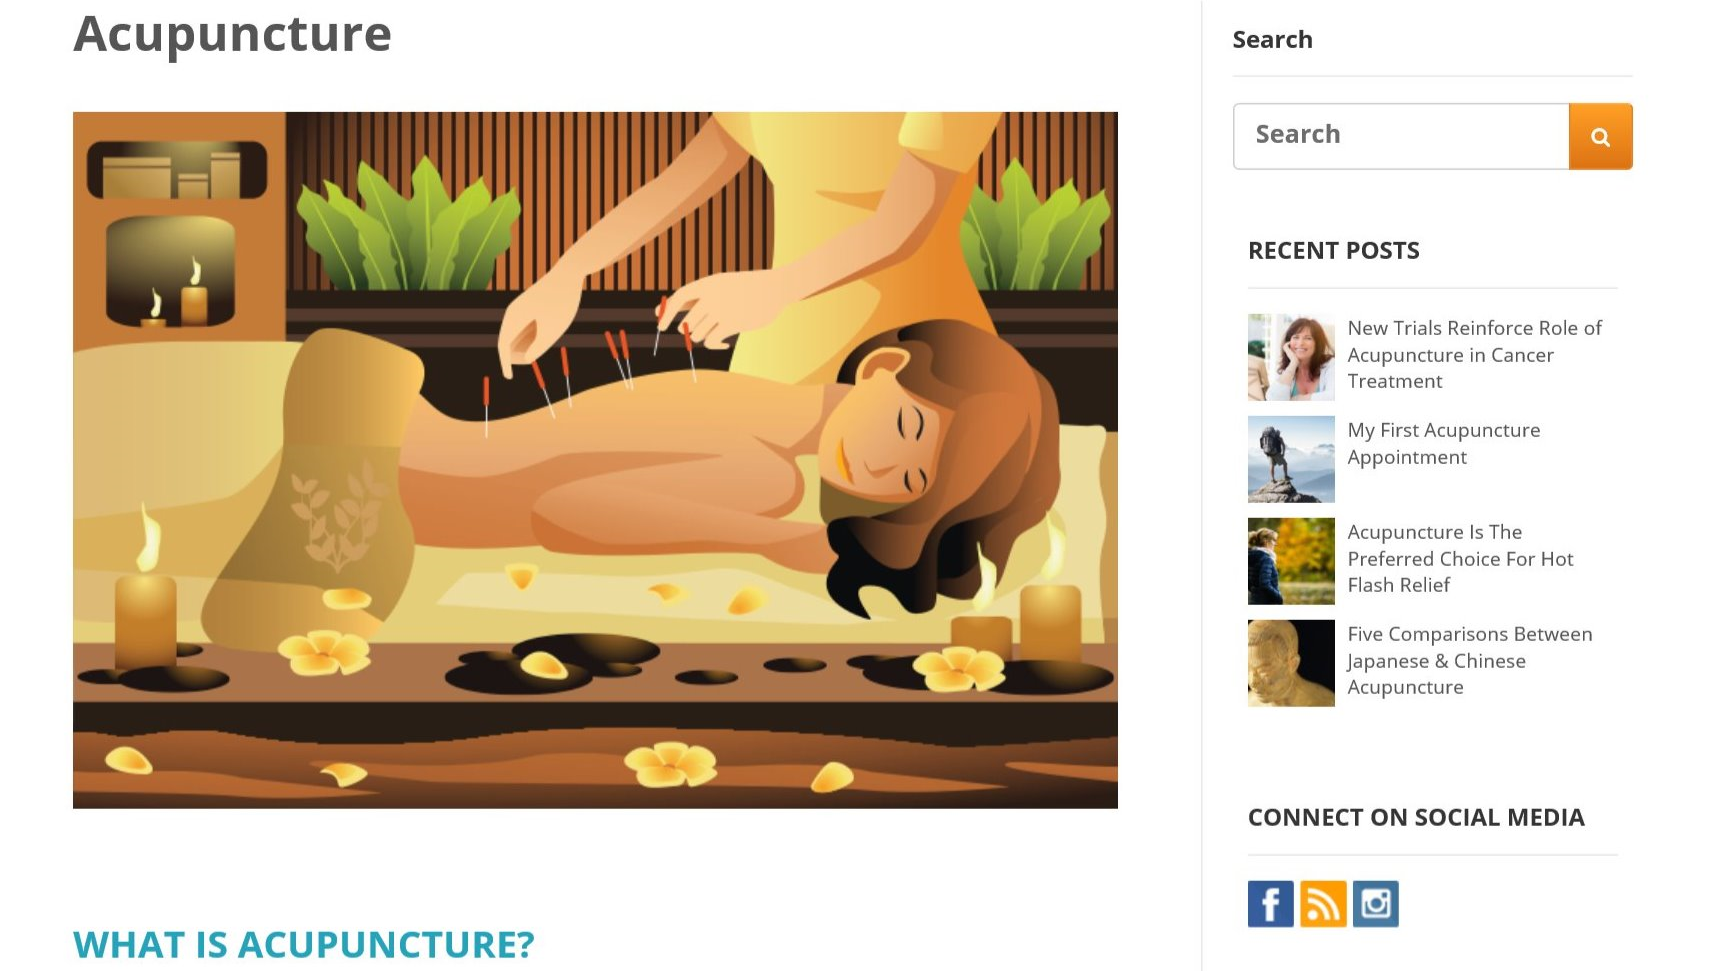 Content Marketing for Acupuncture